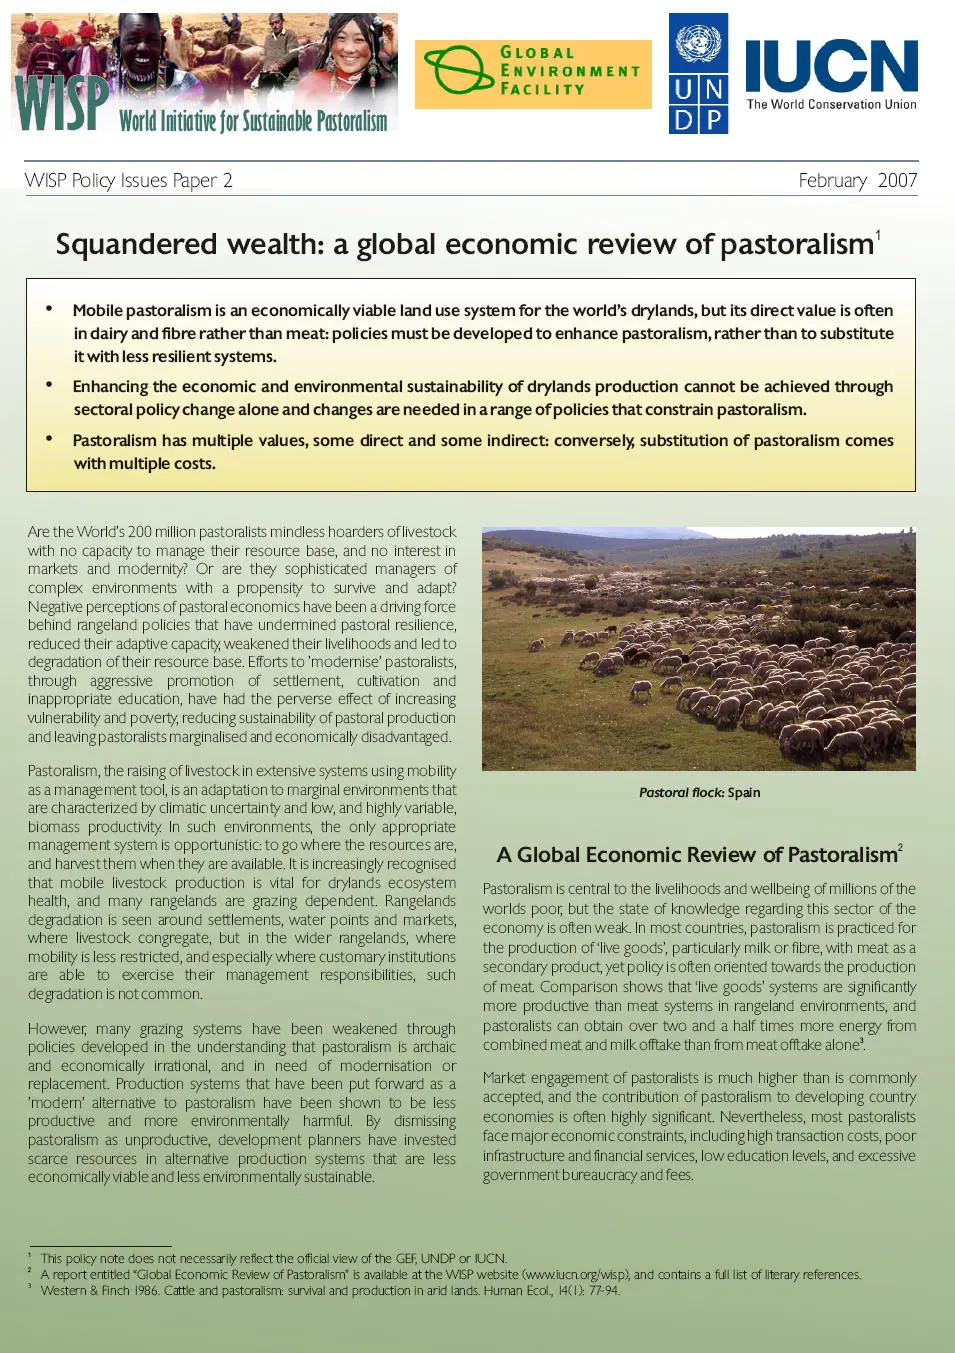 Squandered wealth: a global economic review of pastoralism